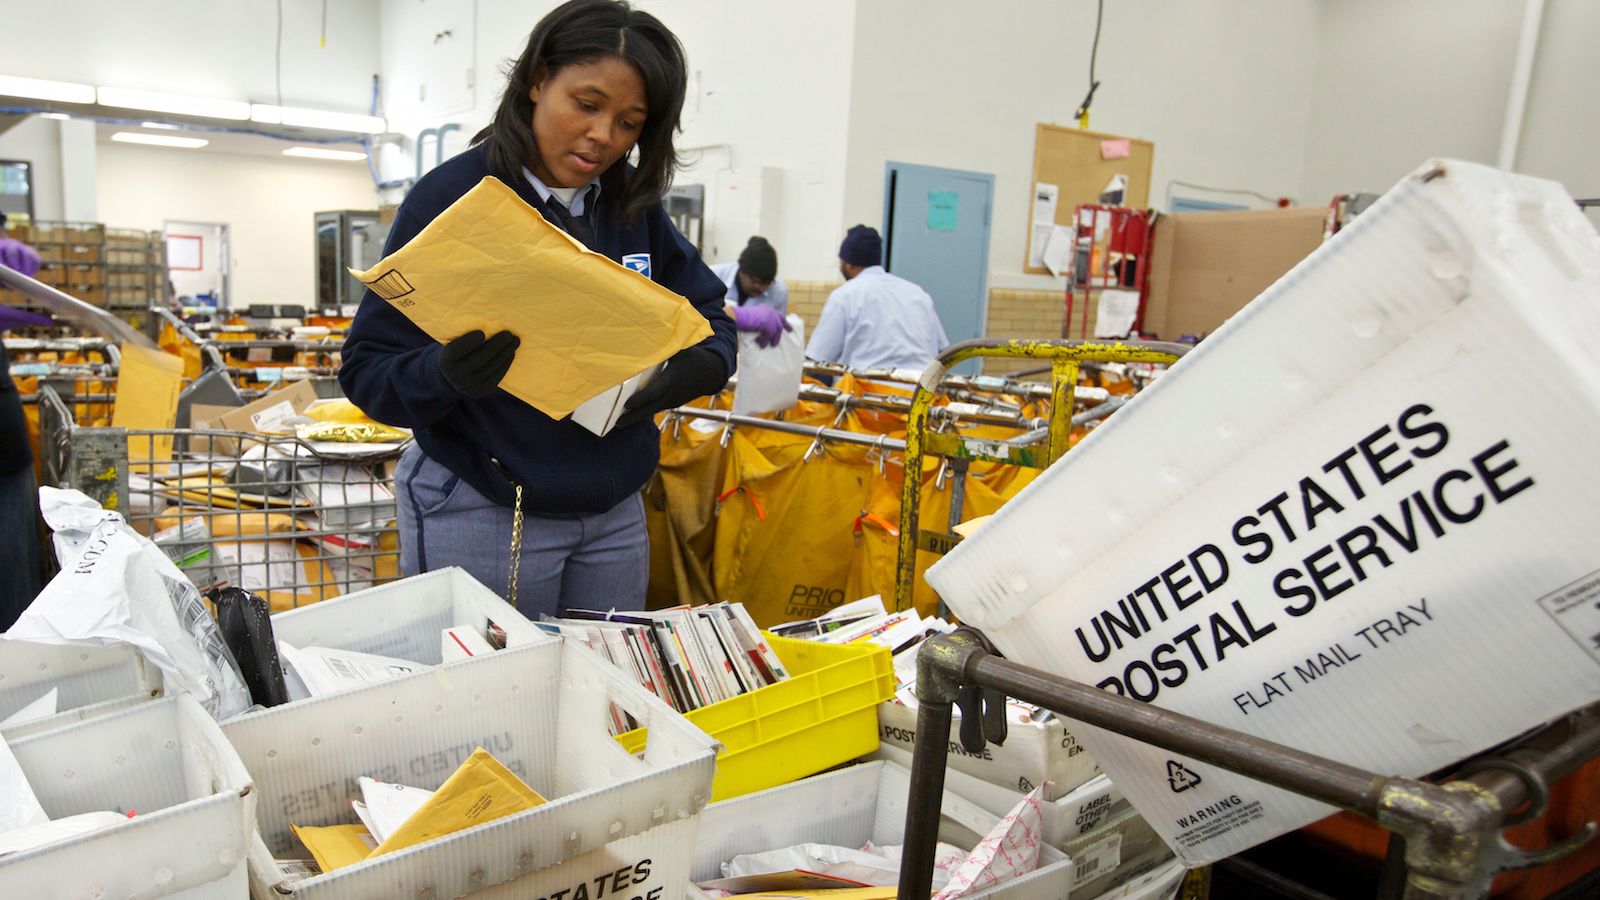 Even the US Postal Service wants to start using blockchain tech